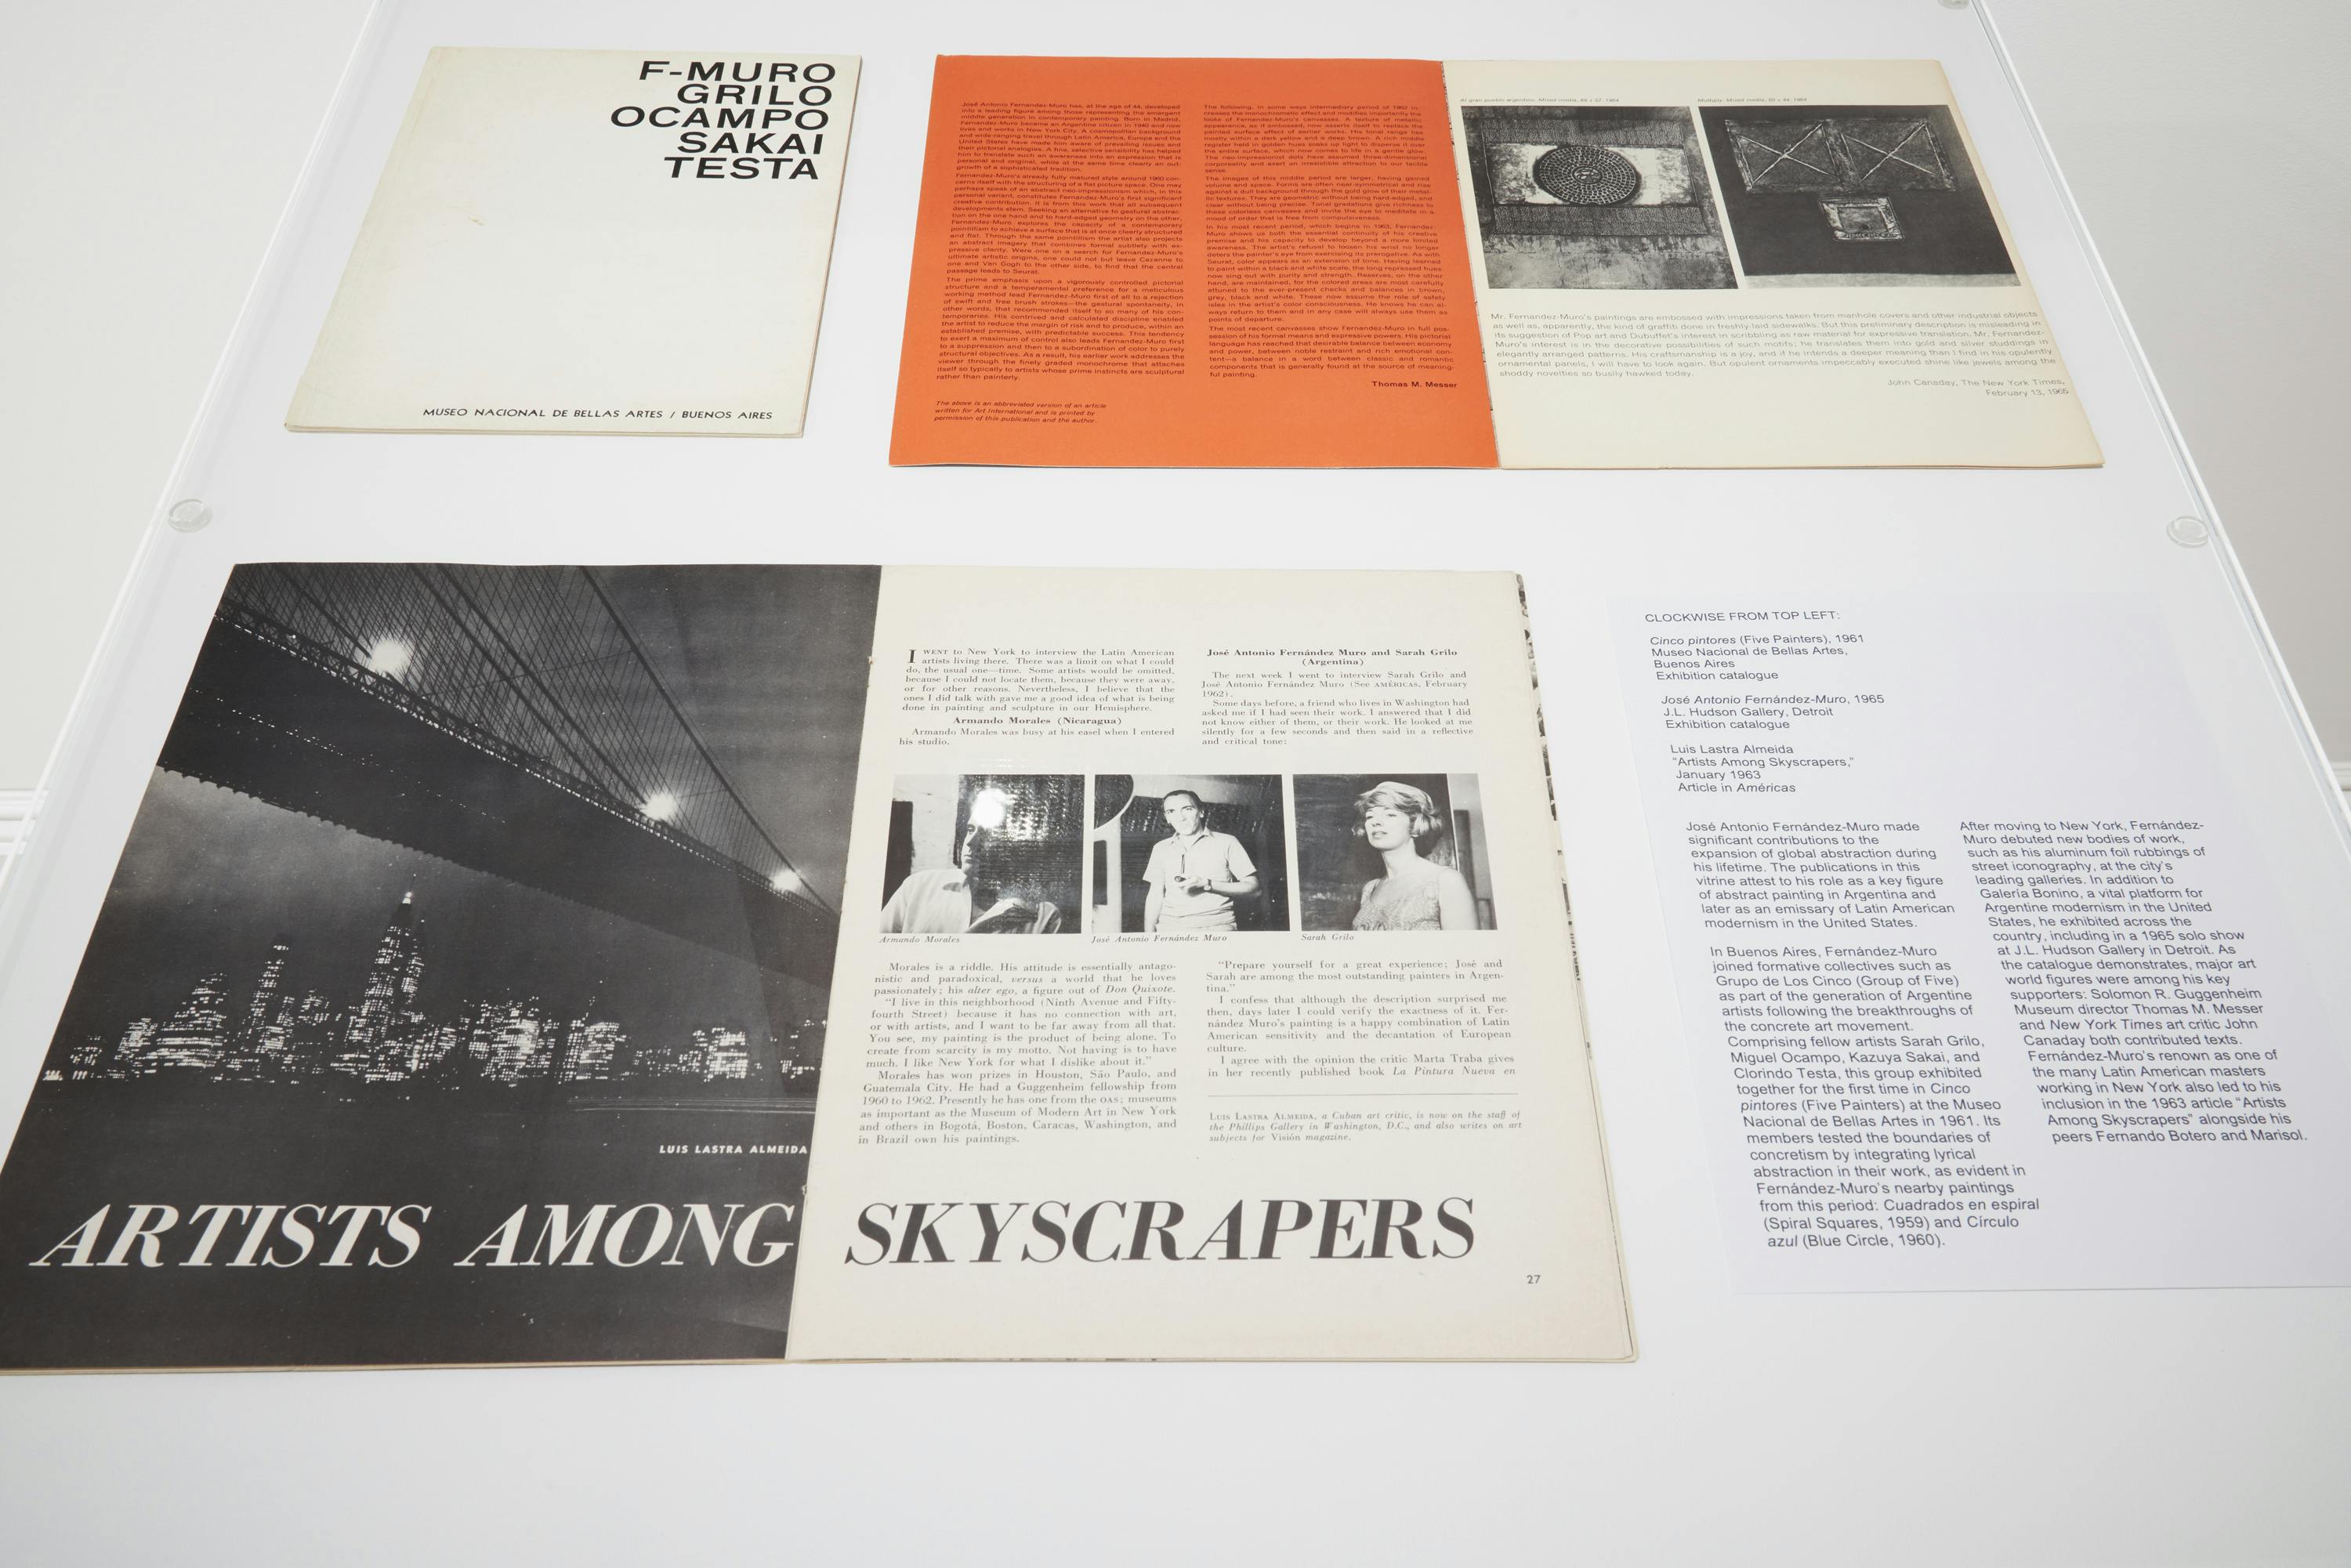 Installation view of vitrine with archival documents and publications featuring José Antonio Fernández-Muro.